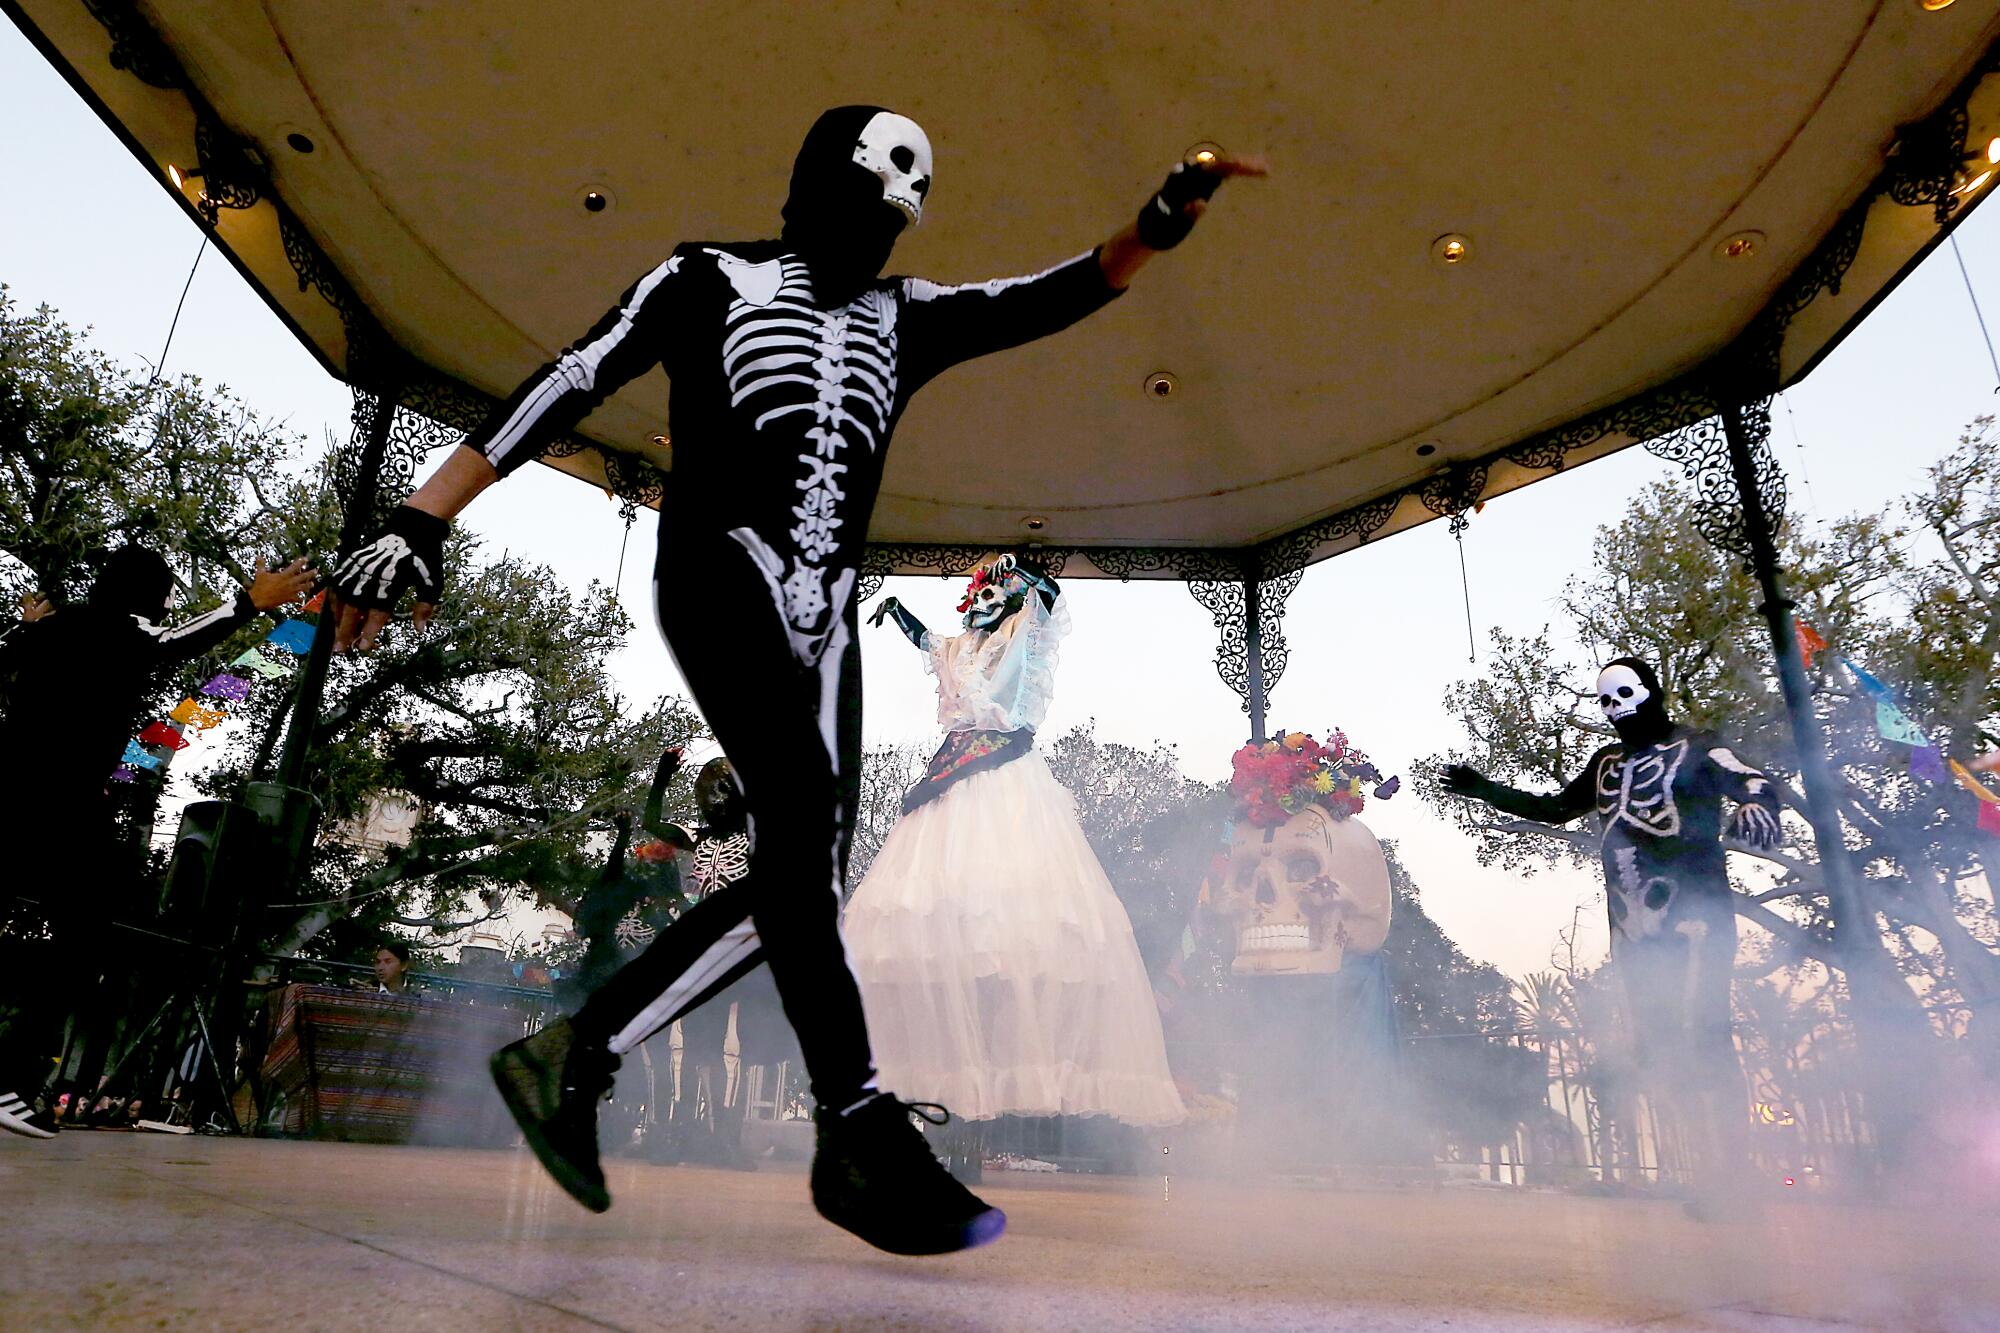 Dancers in skeleton costumes perform at Olvera Plaza during Day of the Dead festivities Wednesday in Los Angeles.